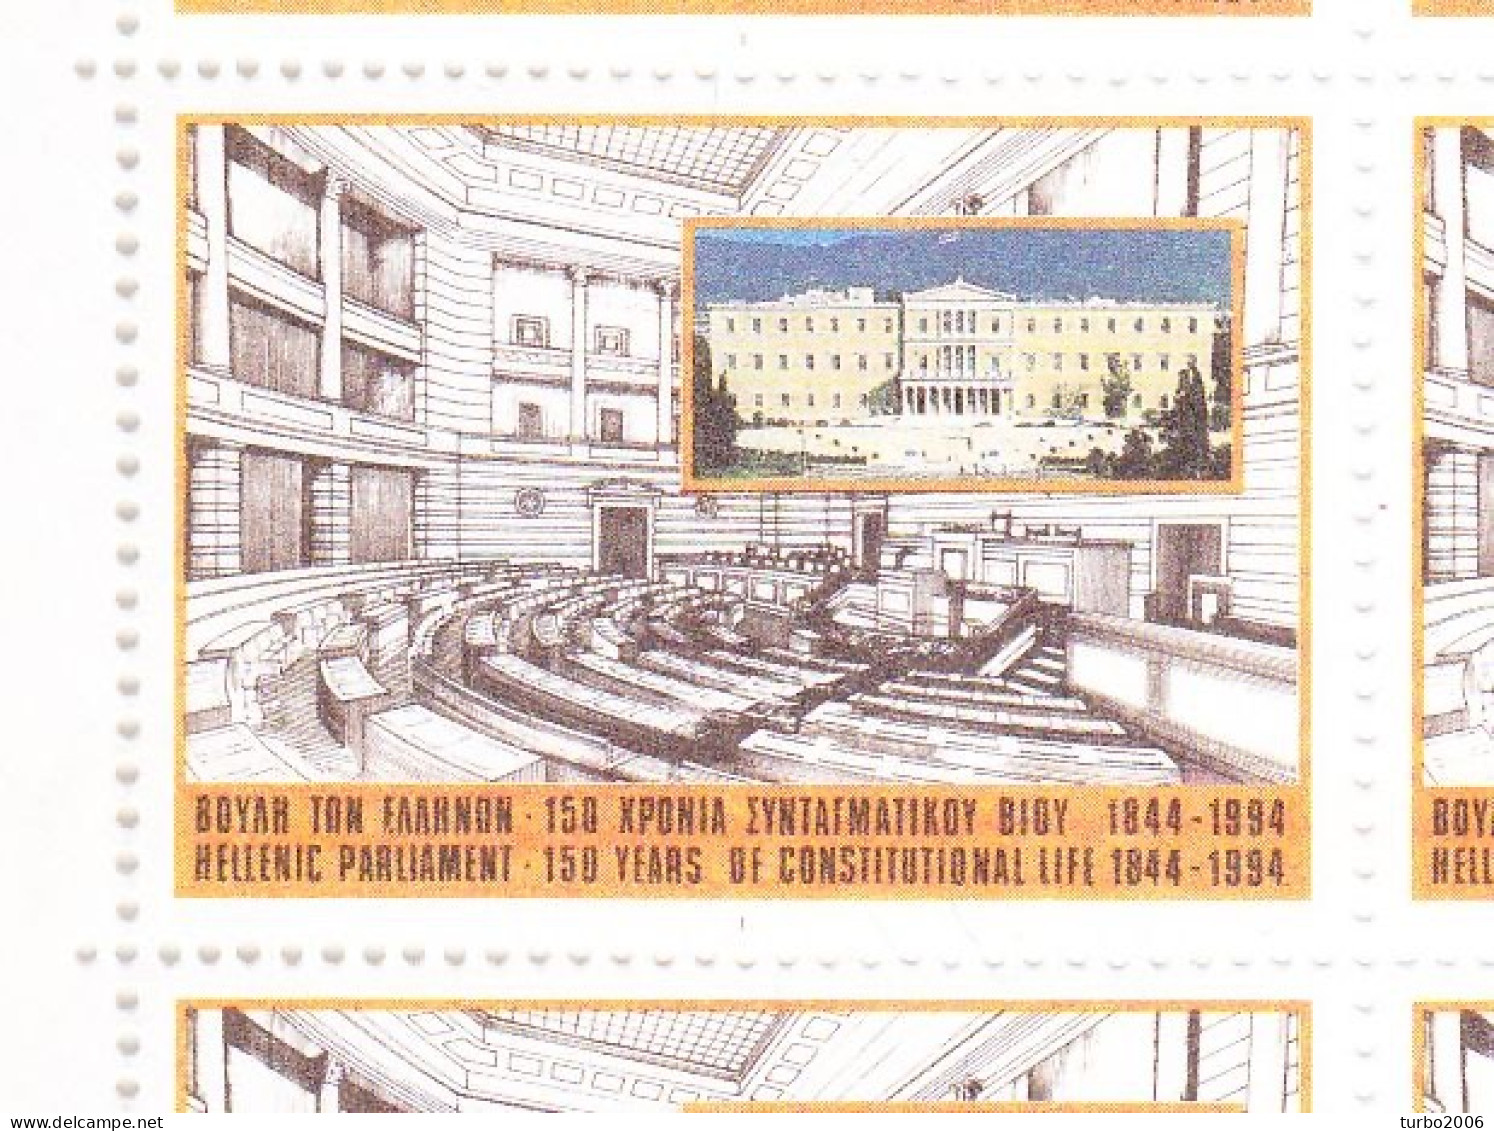 GREECE Label 1994 Hellenic Parliament 150 Years Of Constitutional Life Complete MNH Sheet Of 100 - Steuermarken